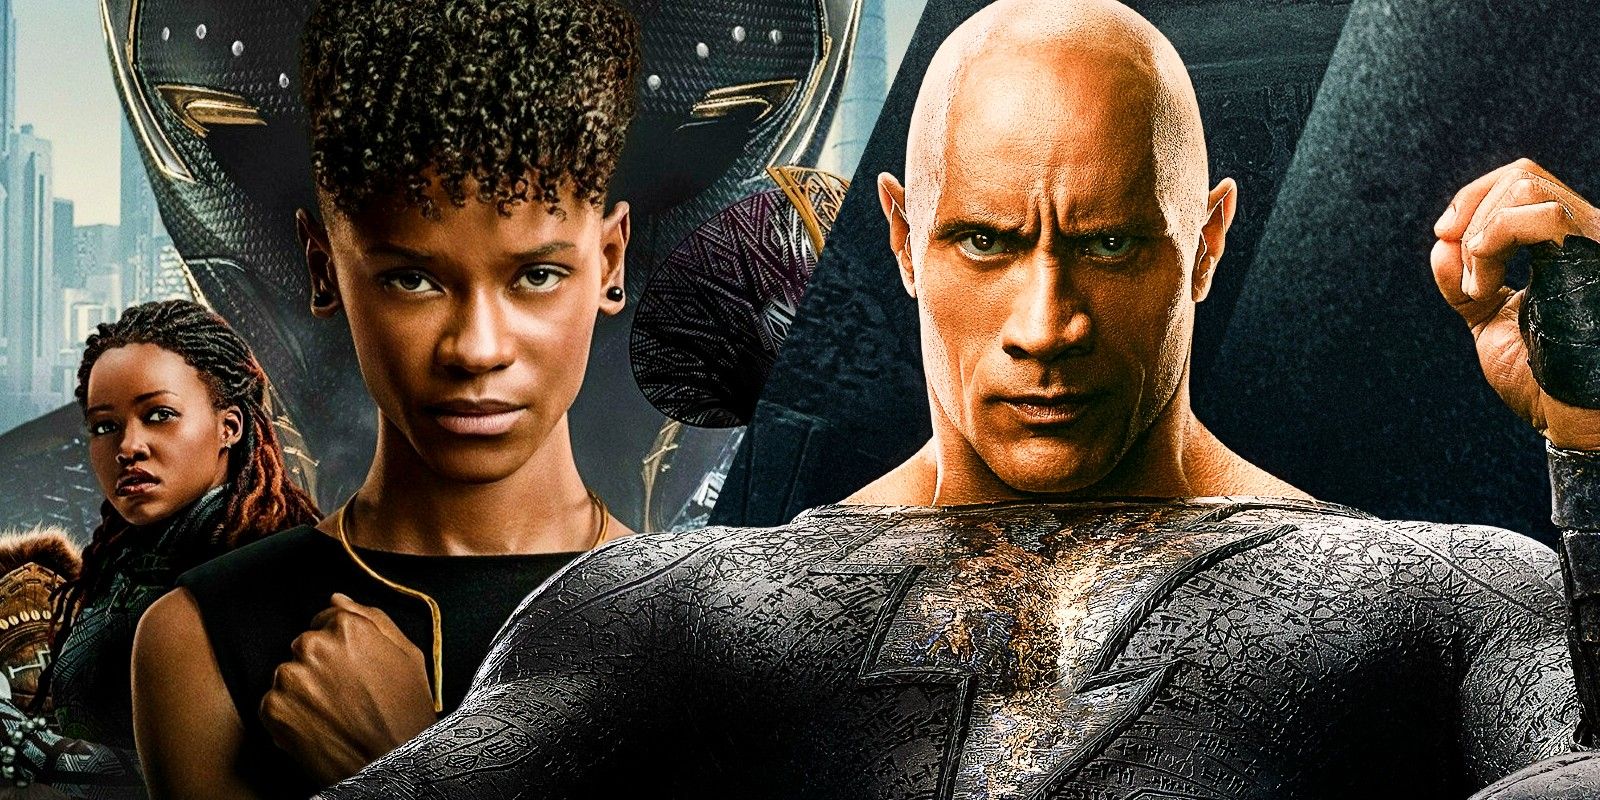 Black Panther 2 and Black Adam are likely to be released in China